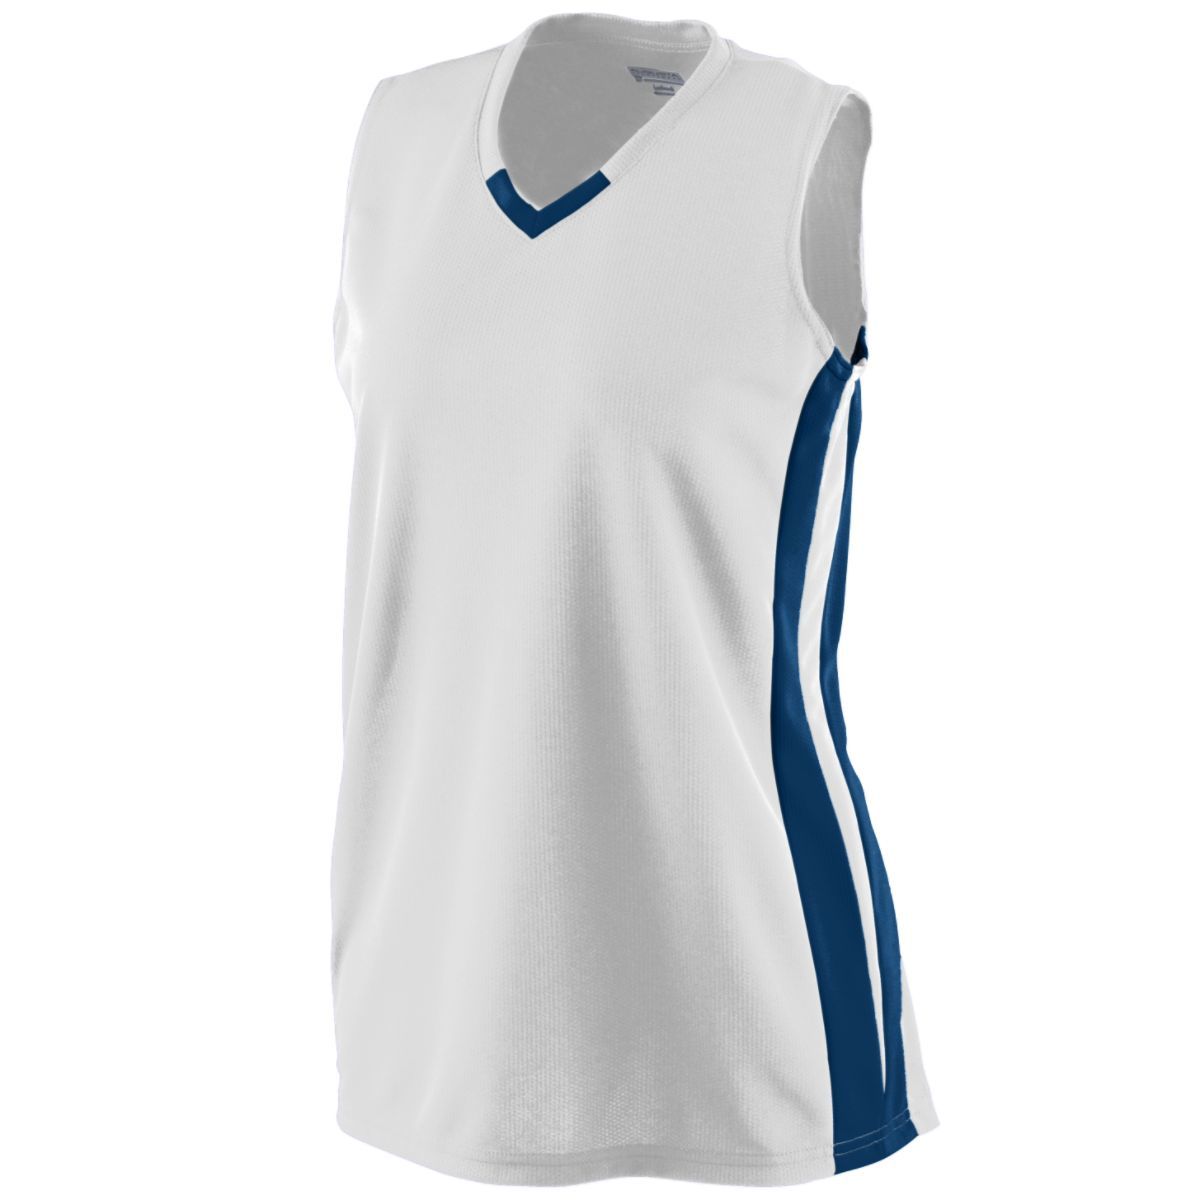 Augusta Sportswear Girls Wicking Mesh Powerhouse Jersey in White/Navy  -Part of the Girls, Augusta-Products, Softball, Girls-Jersey, Shirts product lines at KanaleyCreations.com